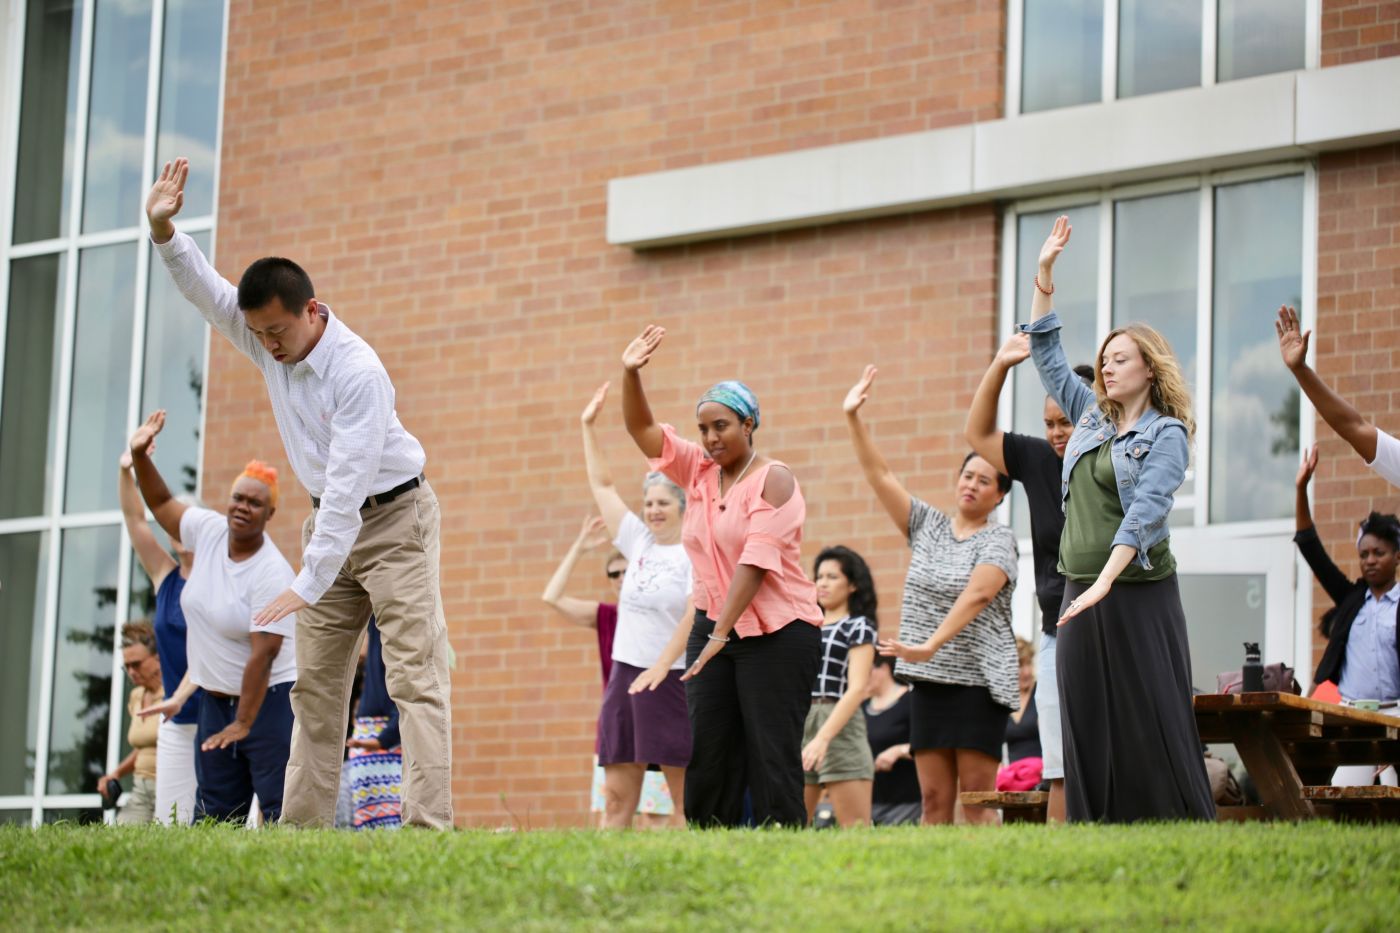 Yang Ye leads participants in Tai Chi lessons at the Convening event.